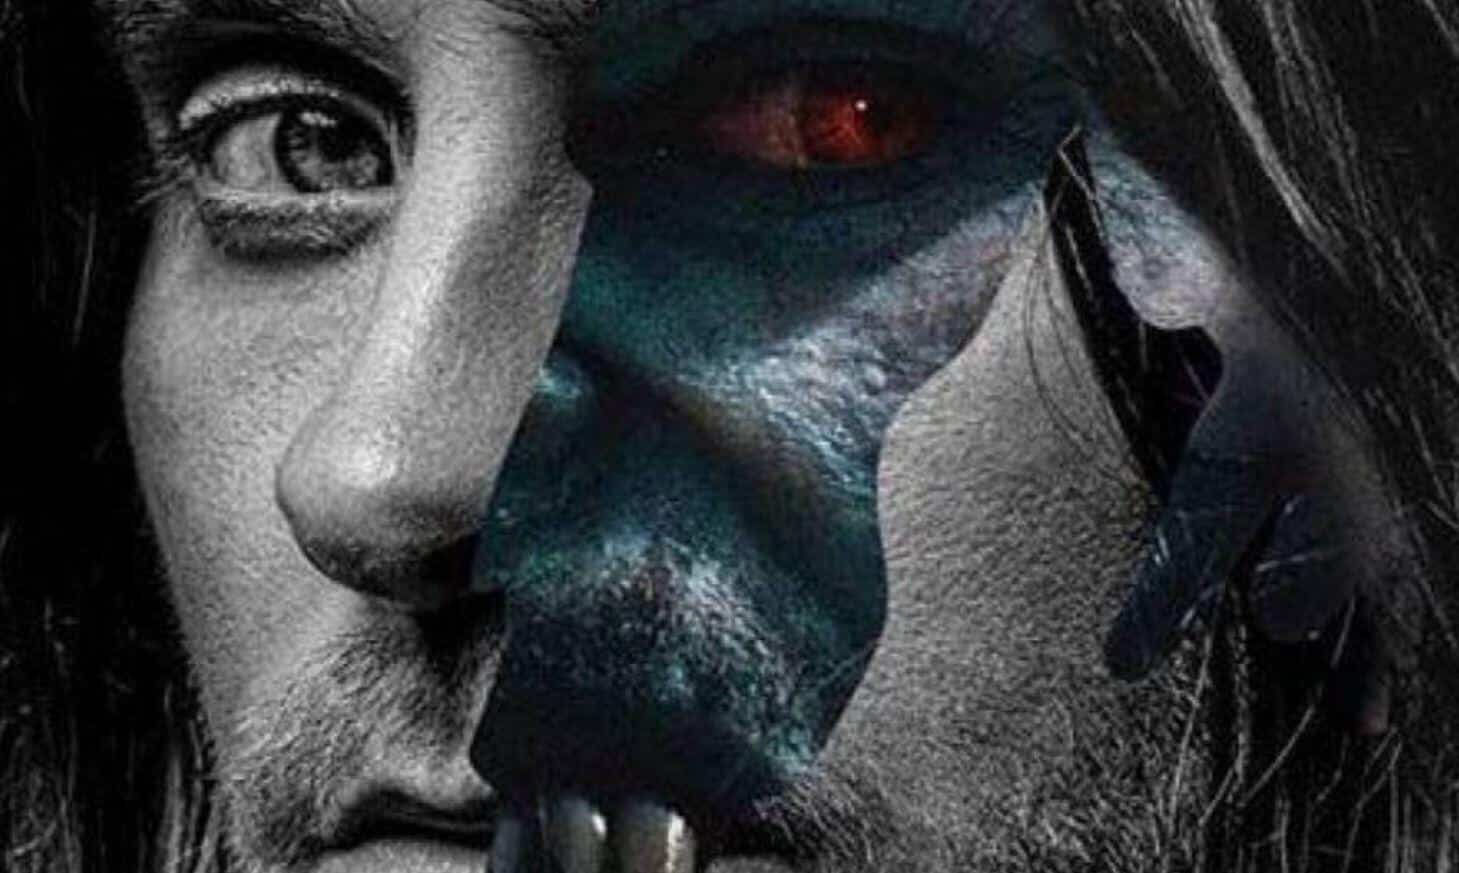 Morbius 2: It's Morbin' Time Script inspired by Morbius Memes teased by Jared Leto jokingly